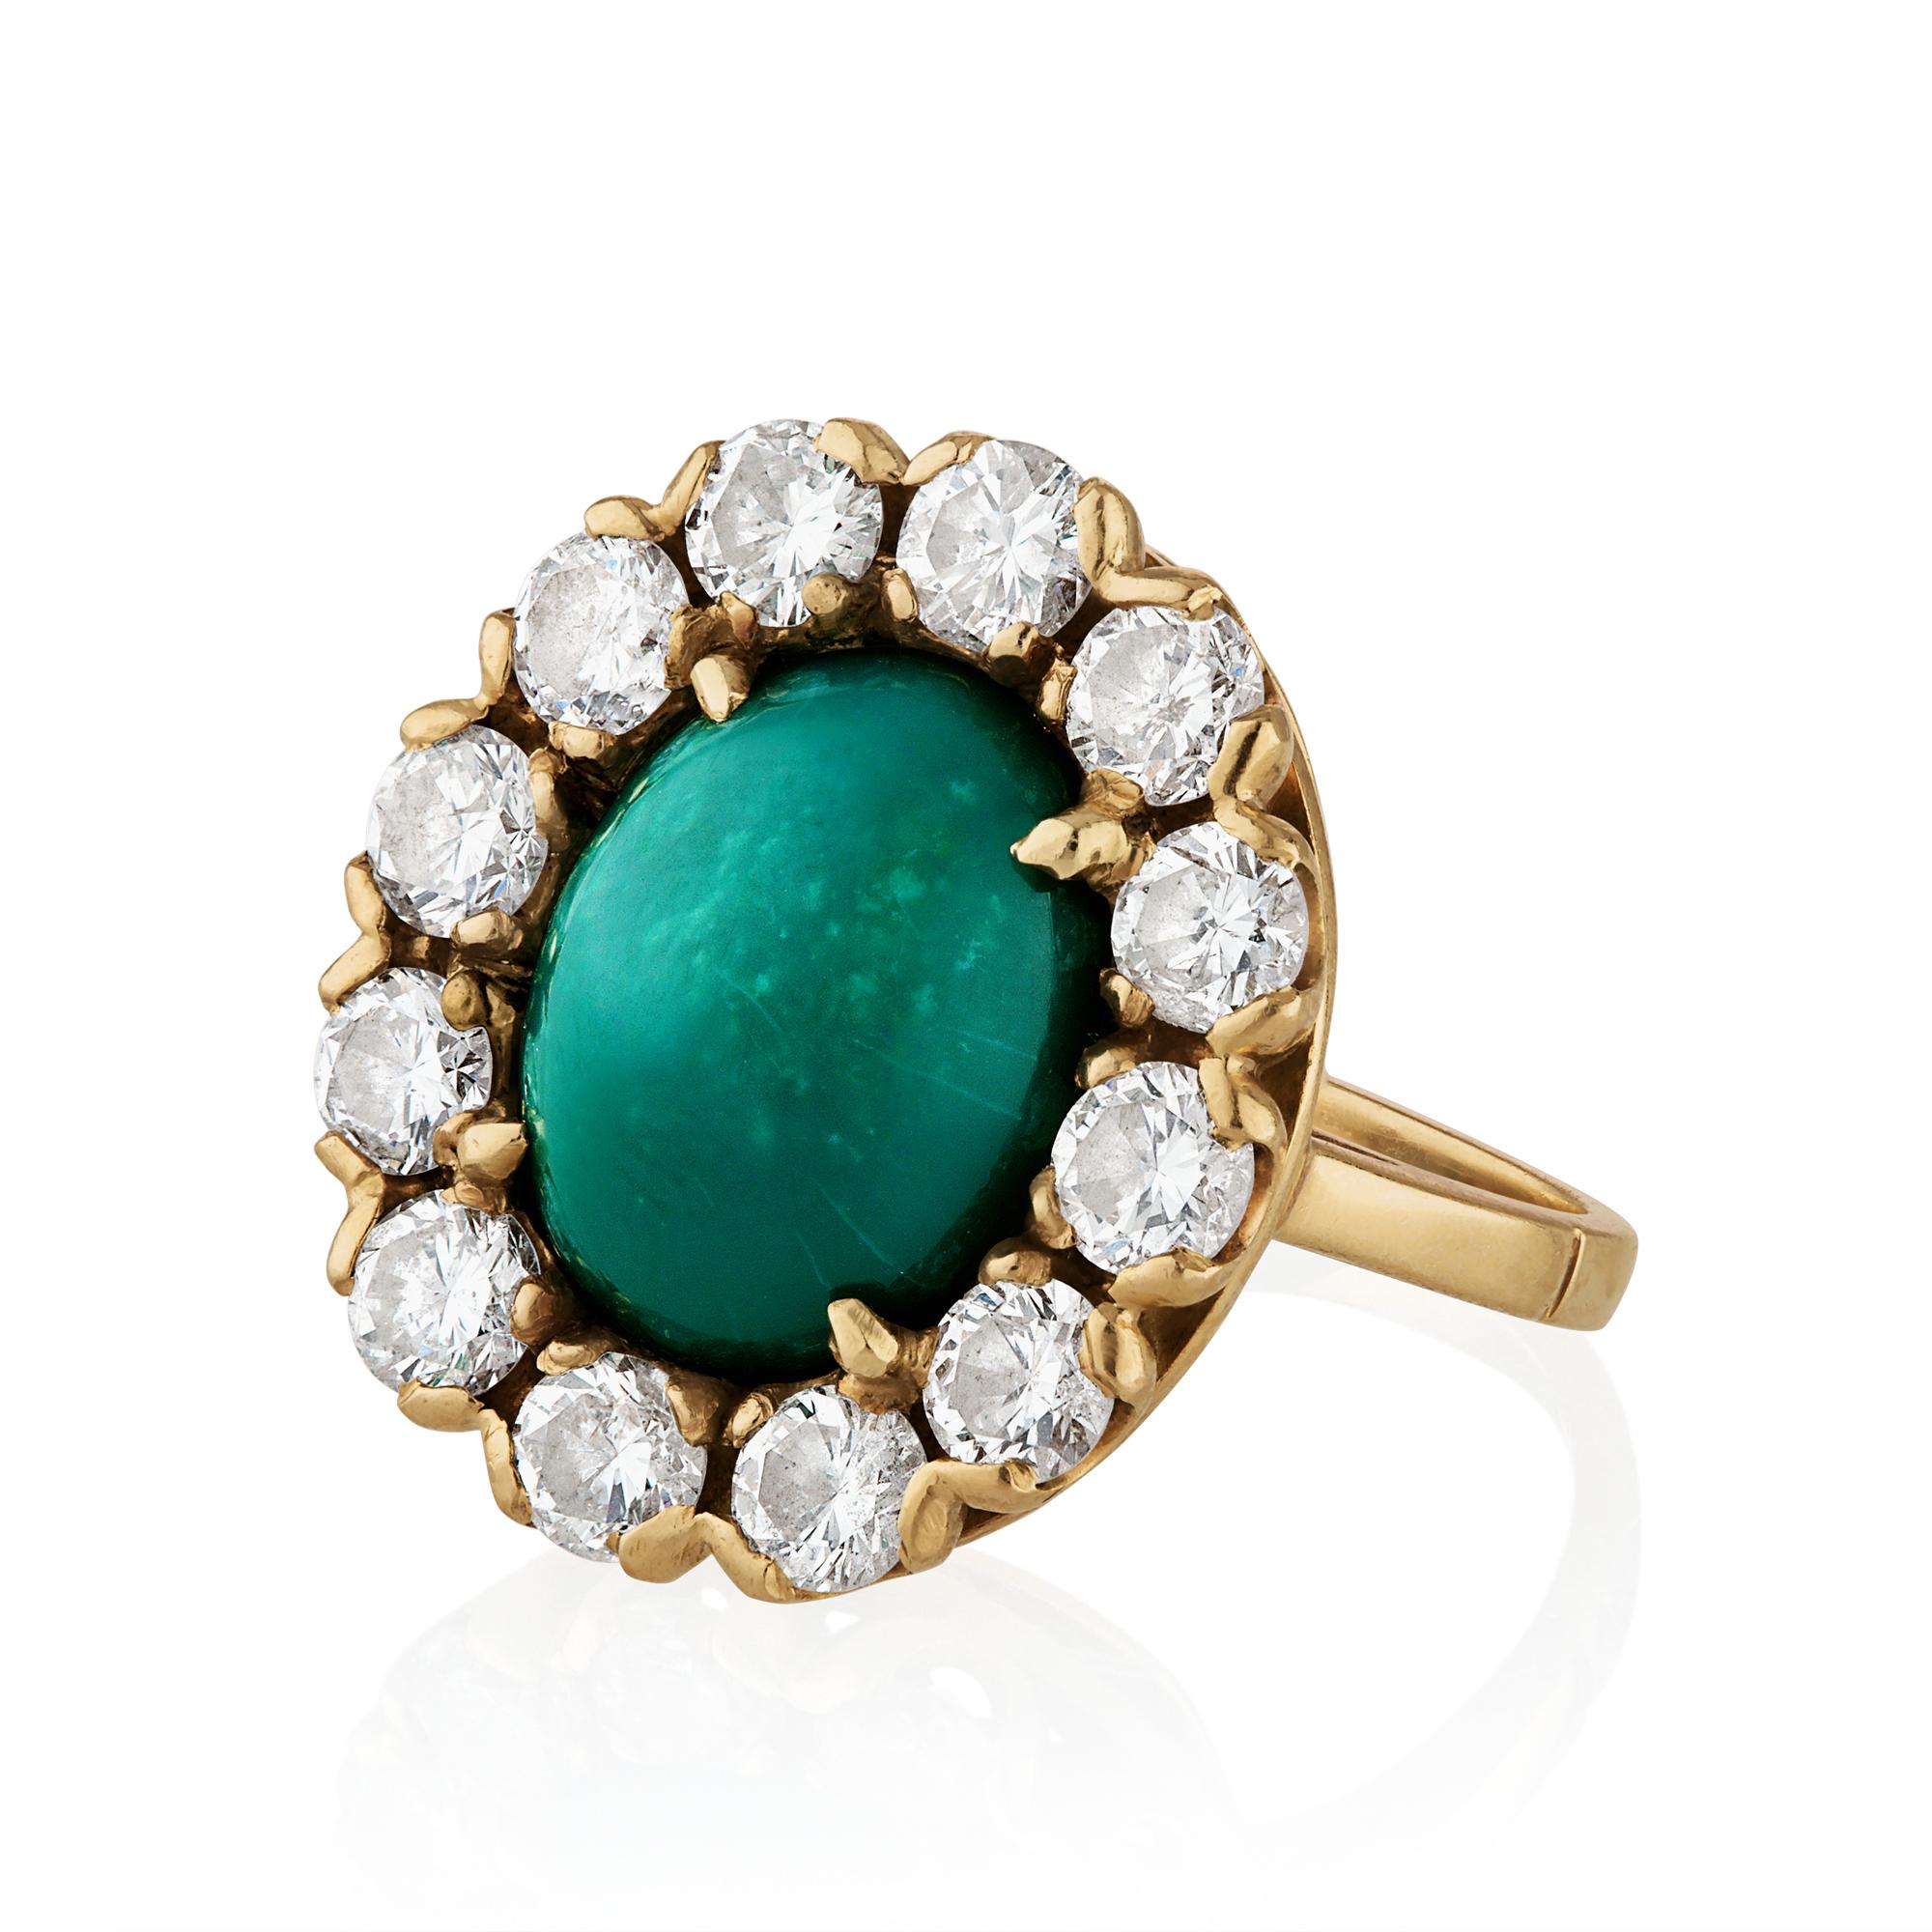 Vintage GIA 7.35ct Green Turquoise Diamond Cluster Engagement Right Hand 14K Gold Ring

A Beautiful Authentic Classic Turquoise and Diamonds Cluster Ring, hand-fabricated in 14K Gold contains GIA Natural Oval Cabochon Turquoise has unusual Green